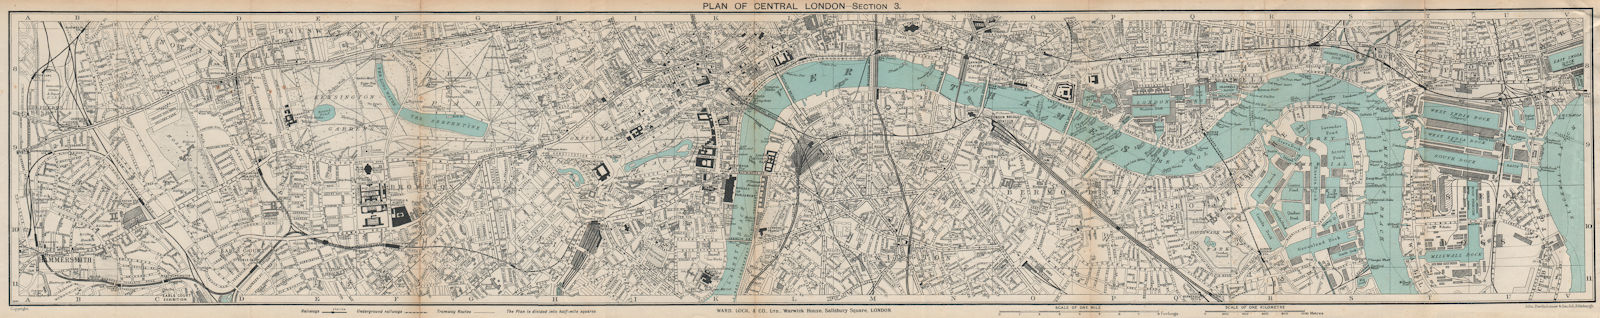 Associate Product CENTRAL LONDON-SECTION 3 vintage town/city plan. London. WARD LOCK 1930 map